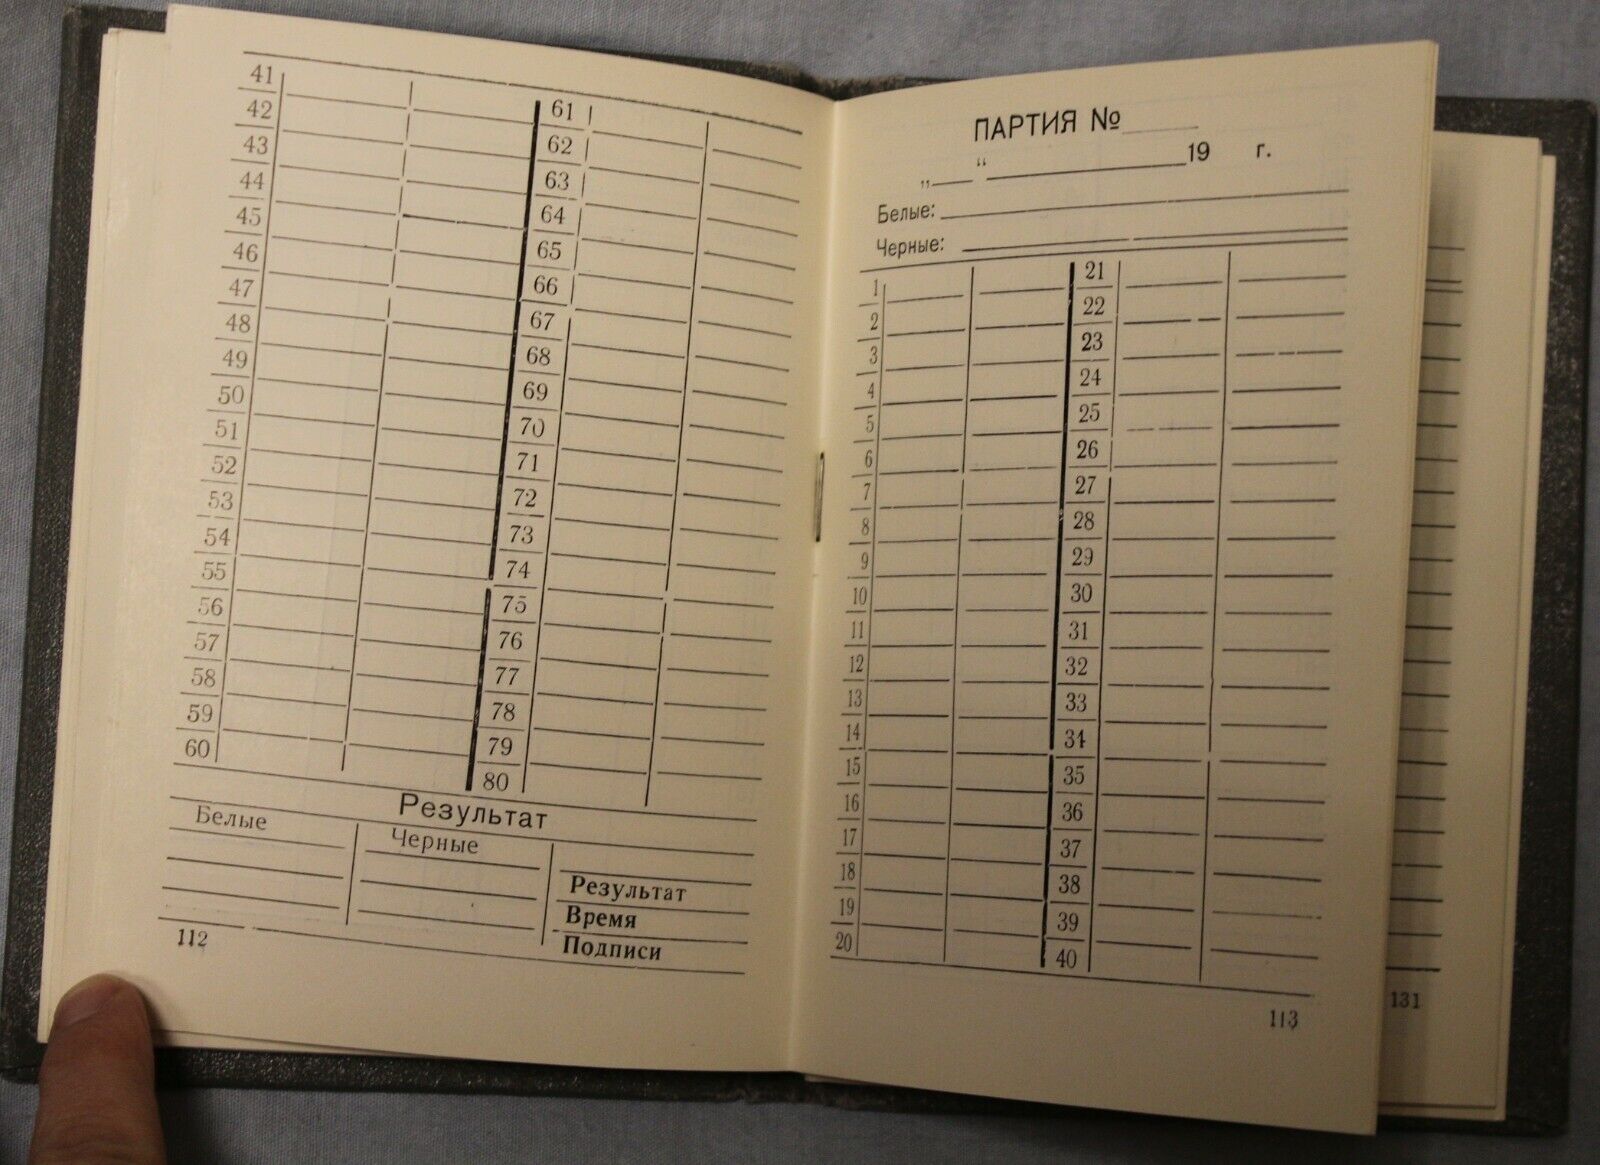 11512.Russian chess book: Chess player's notebook. USSR, 1970s.